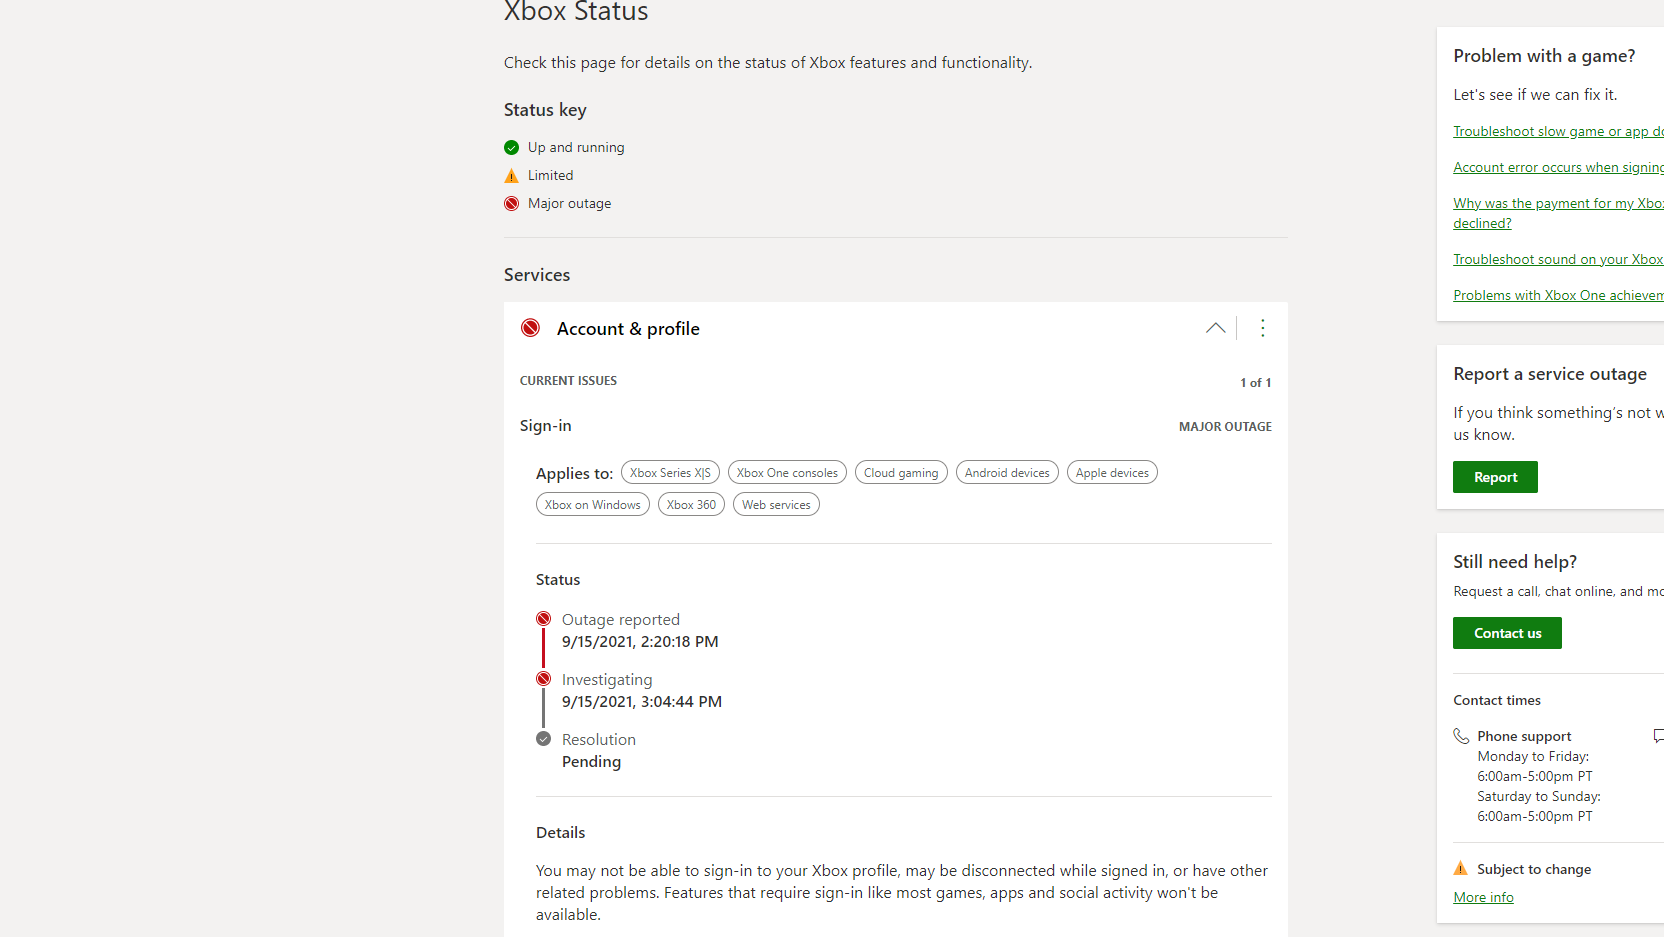 Visit the Xbox Live status page to check if there are any known issues
If there are no issues, proceed to the next fix